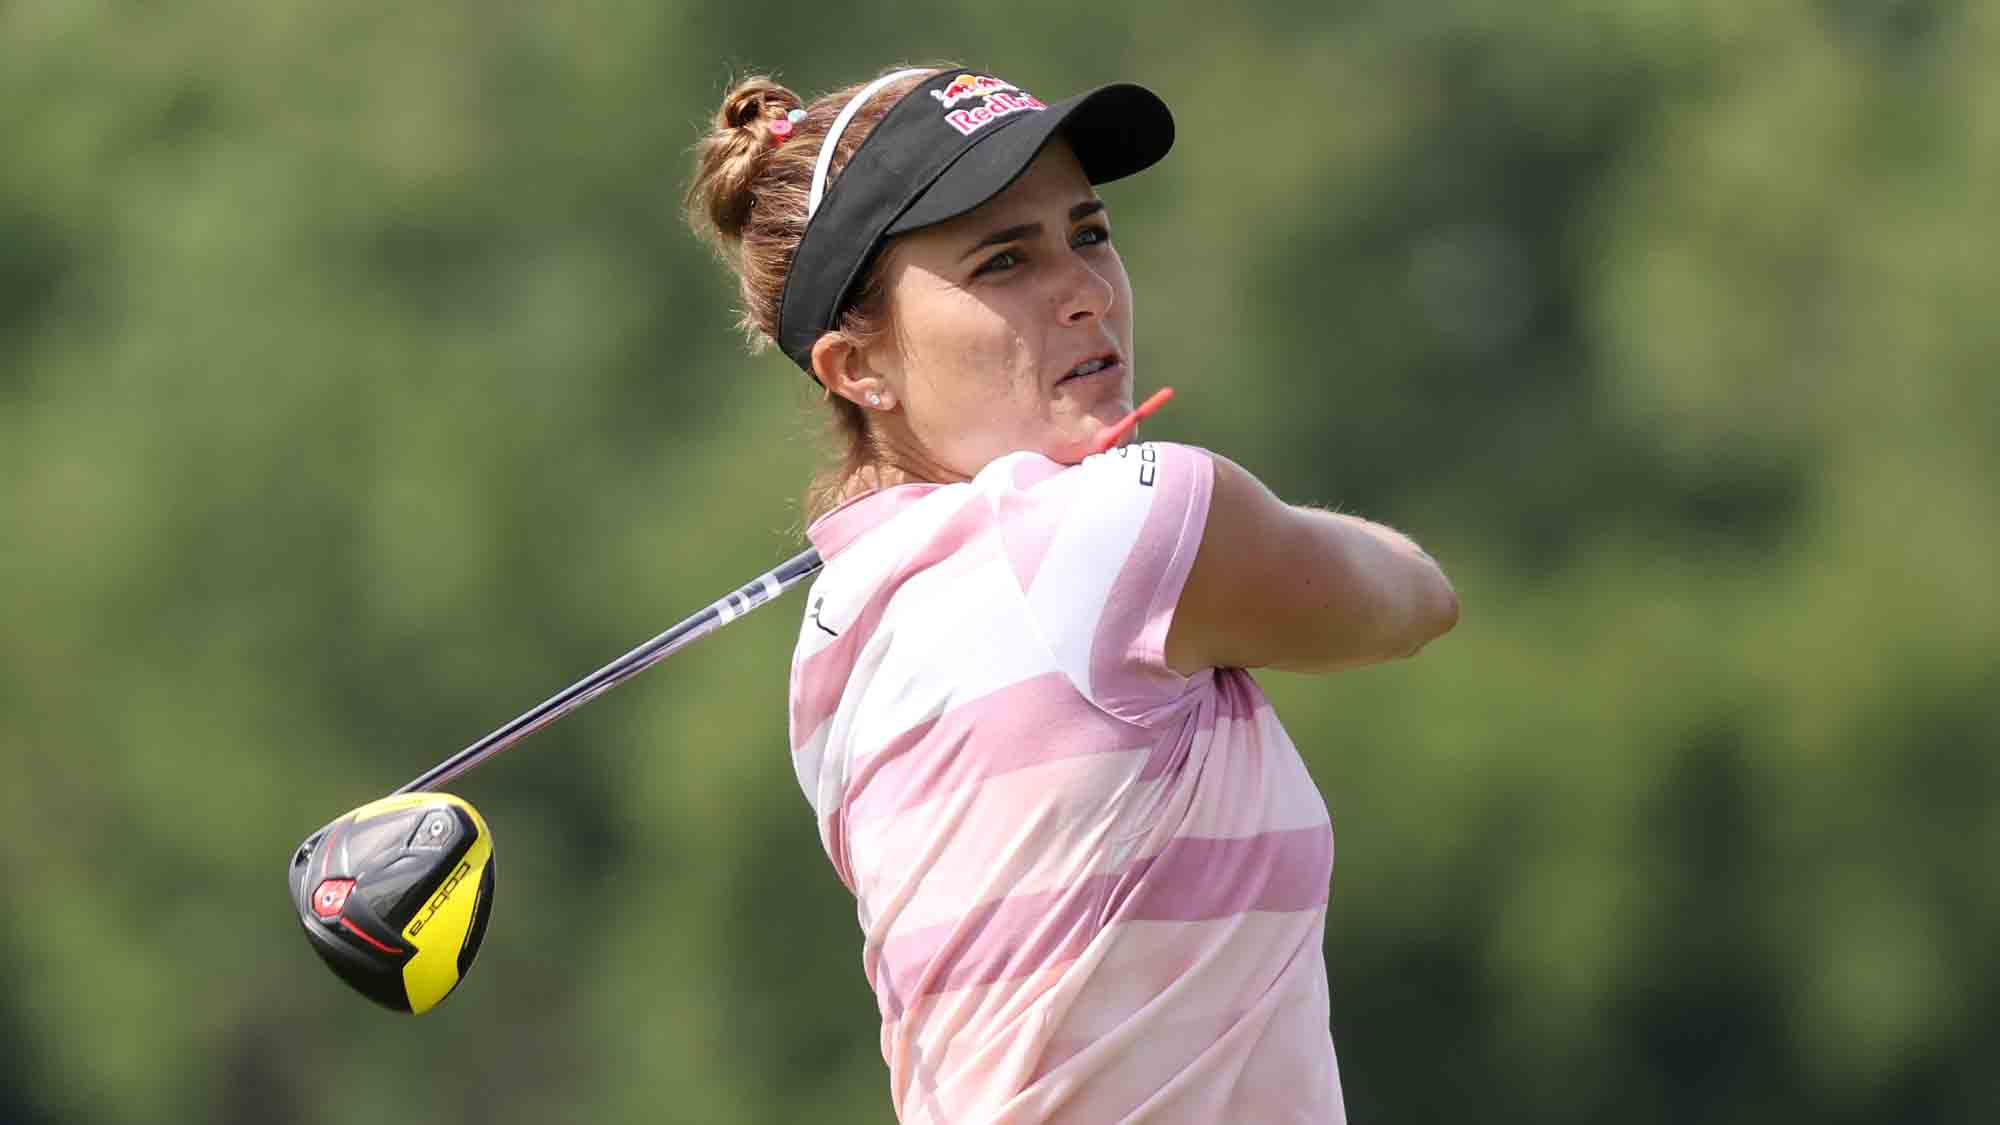 Inverness Club Wowing LPGA Tour Players at the LPGA Drive On